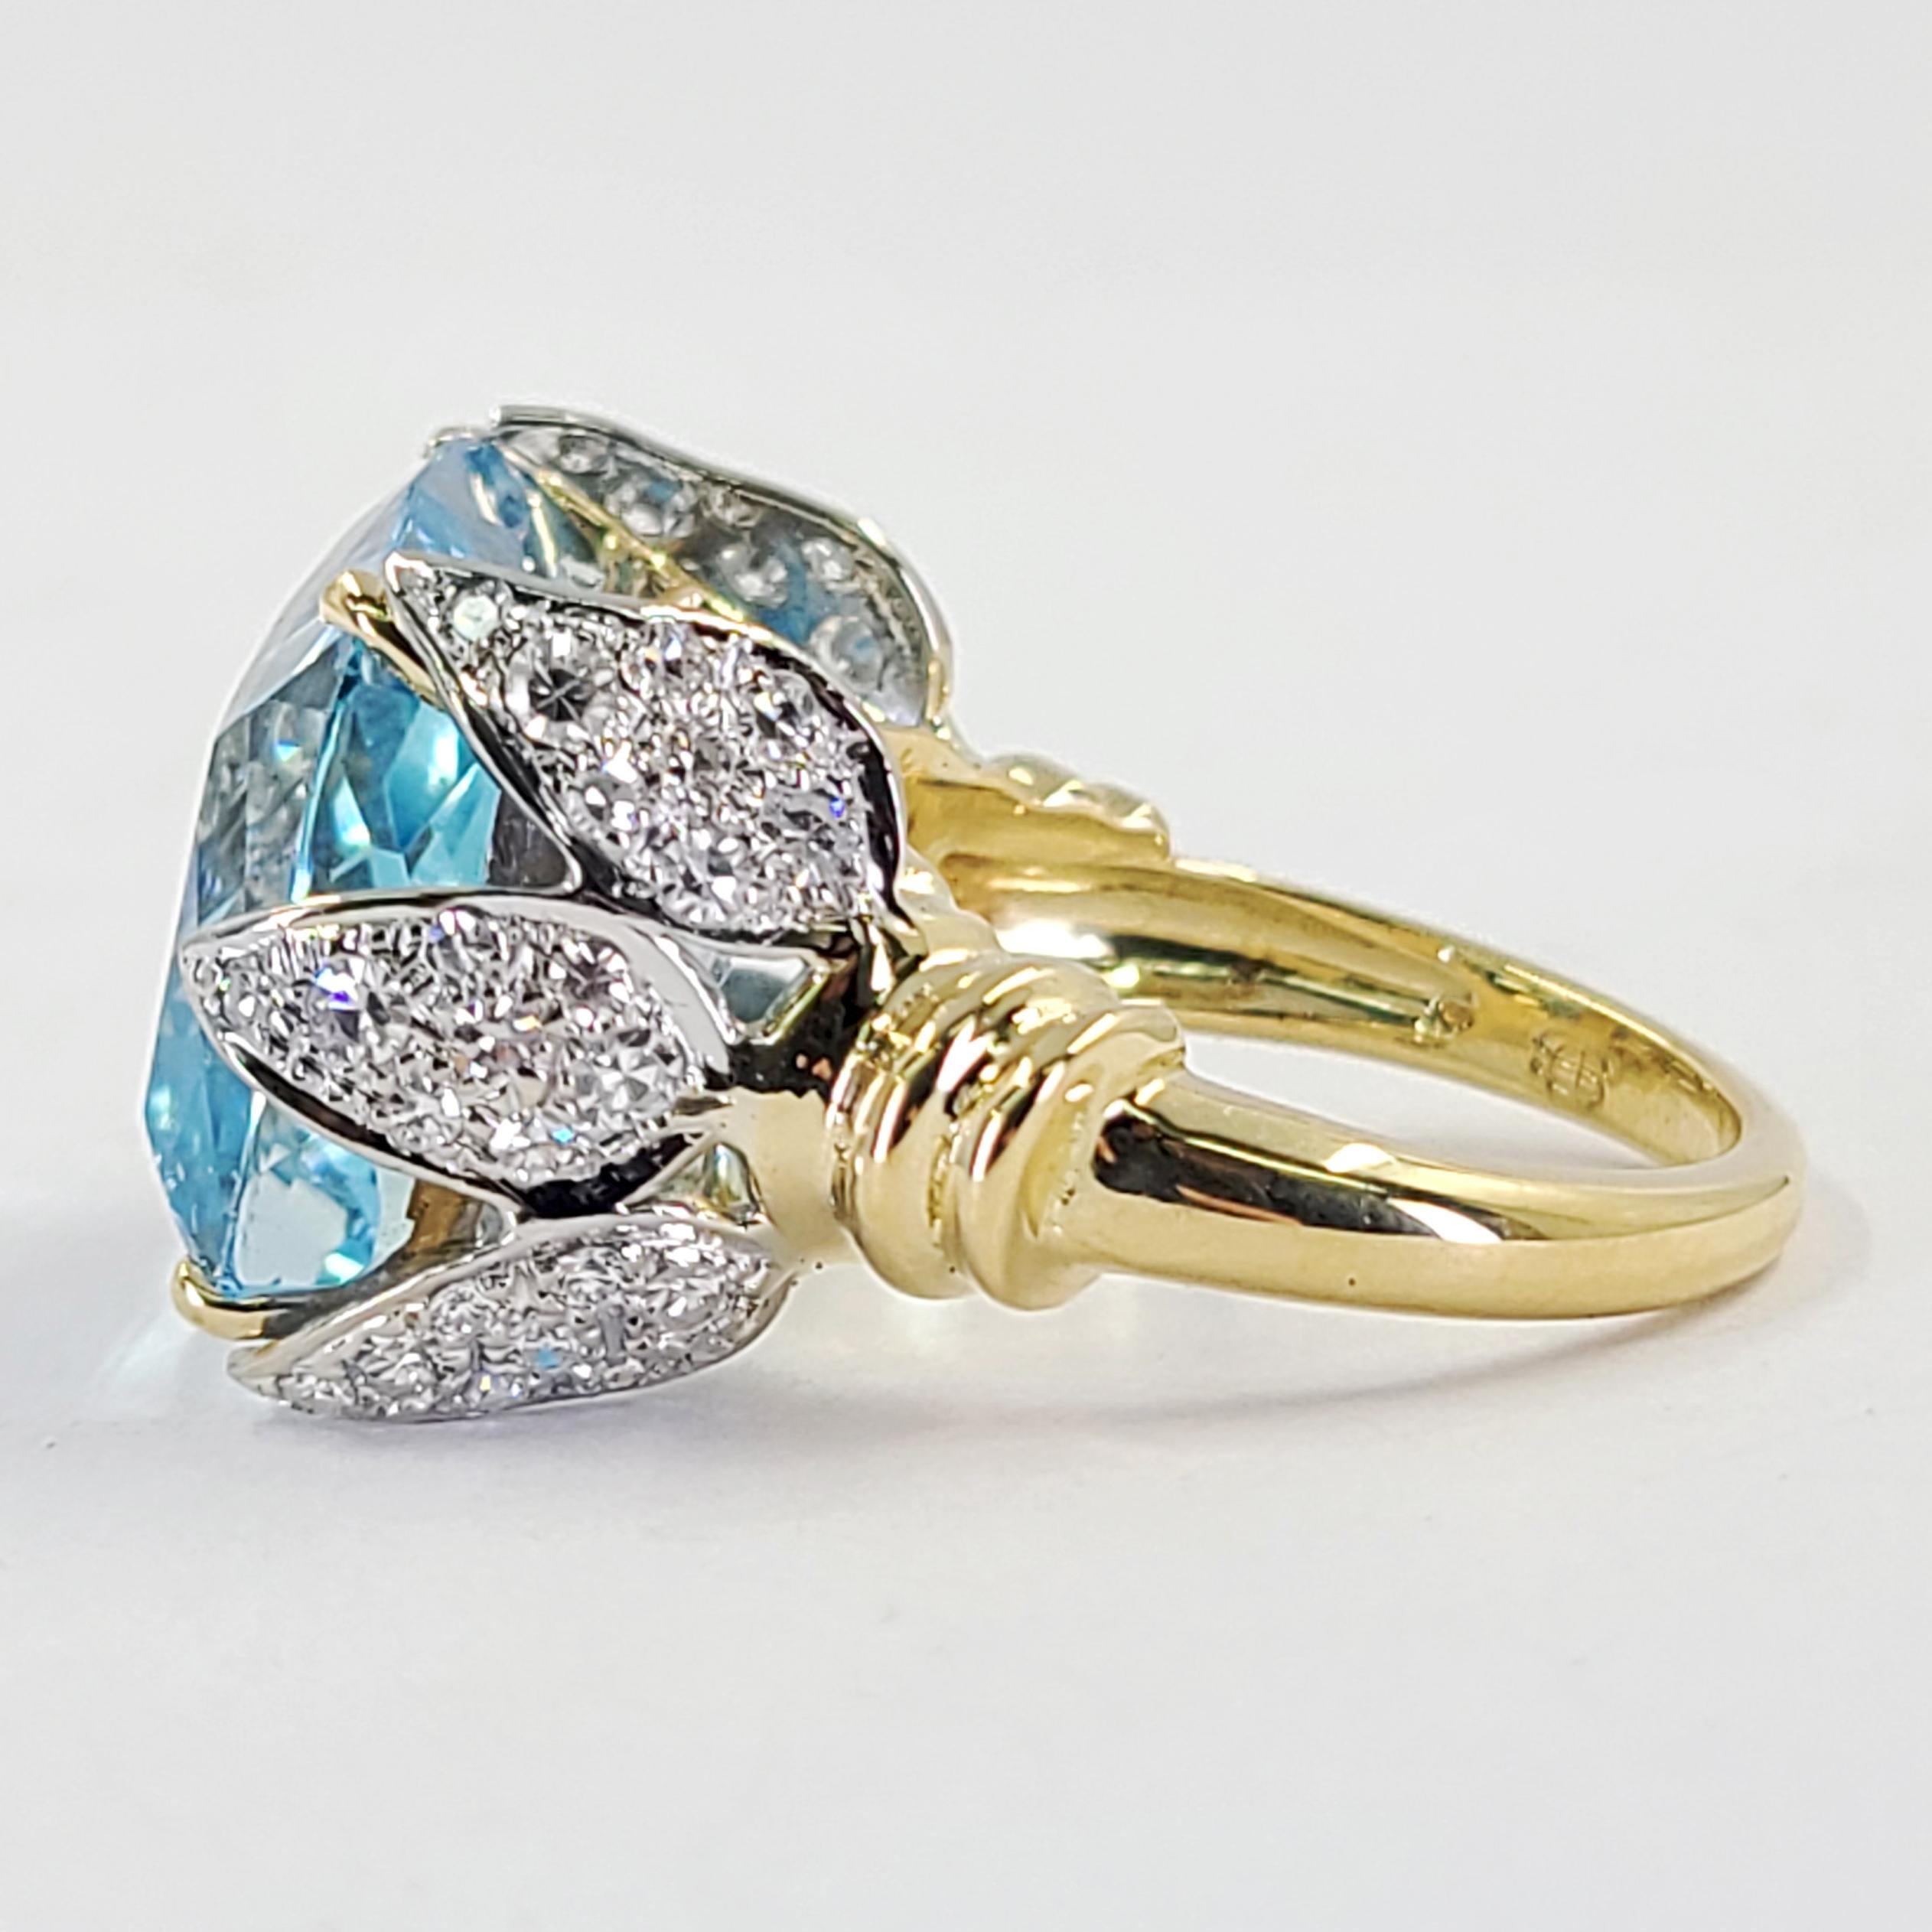 18 Karat Yellow & White Gold Ring Featuring An 18 Carat Cushion Cut Aquamarine Set Horizontally With 3 Pave Petals or Leaves On Each Side. 48 Single Cut Diamonds Of VS Clarity & G Color Total An Additional 1.00 Carat. Finger Size 6.75; Purchase